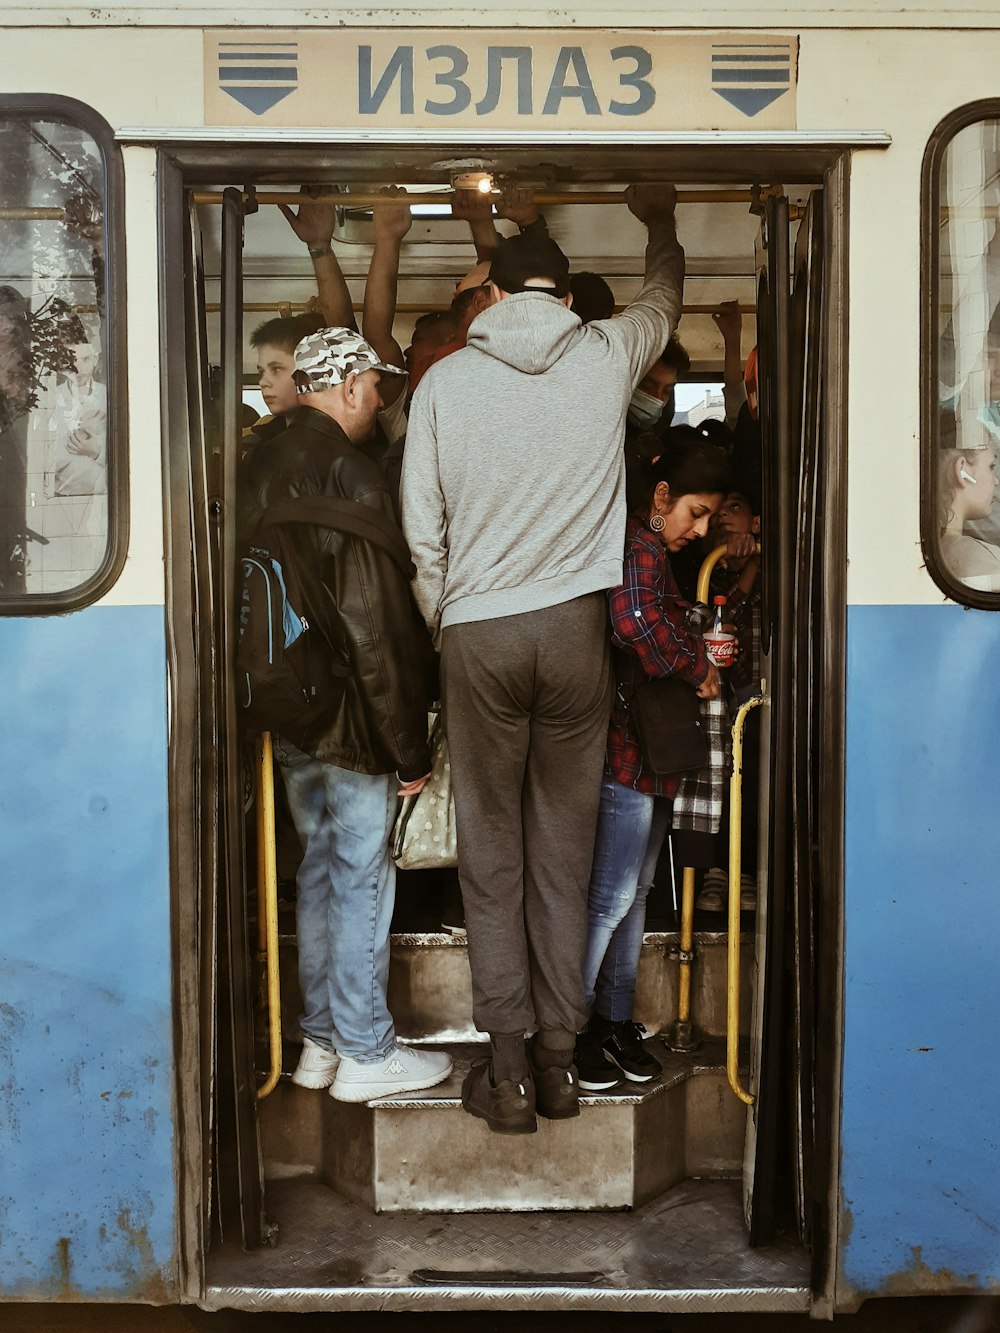 a group of people standing in a train